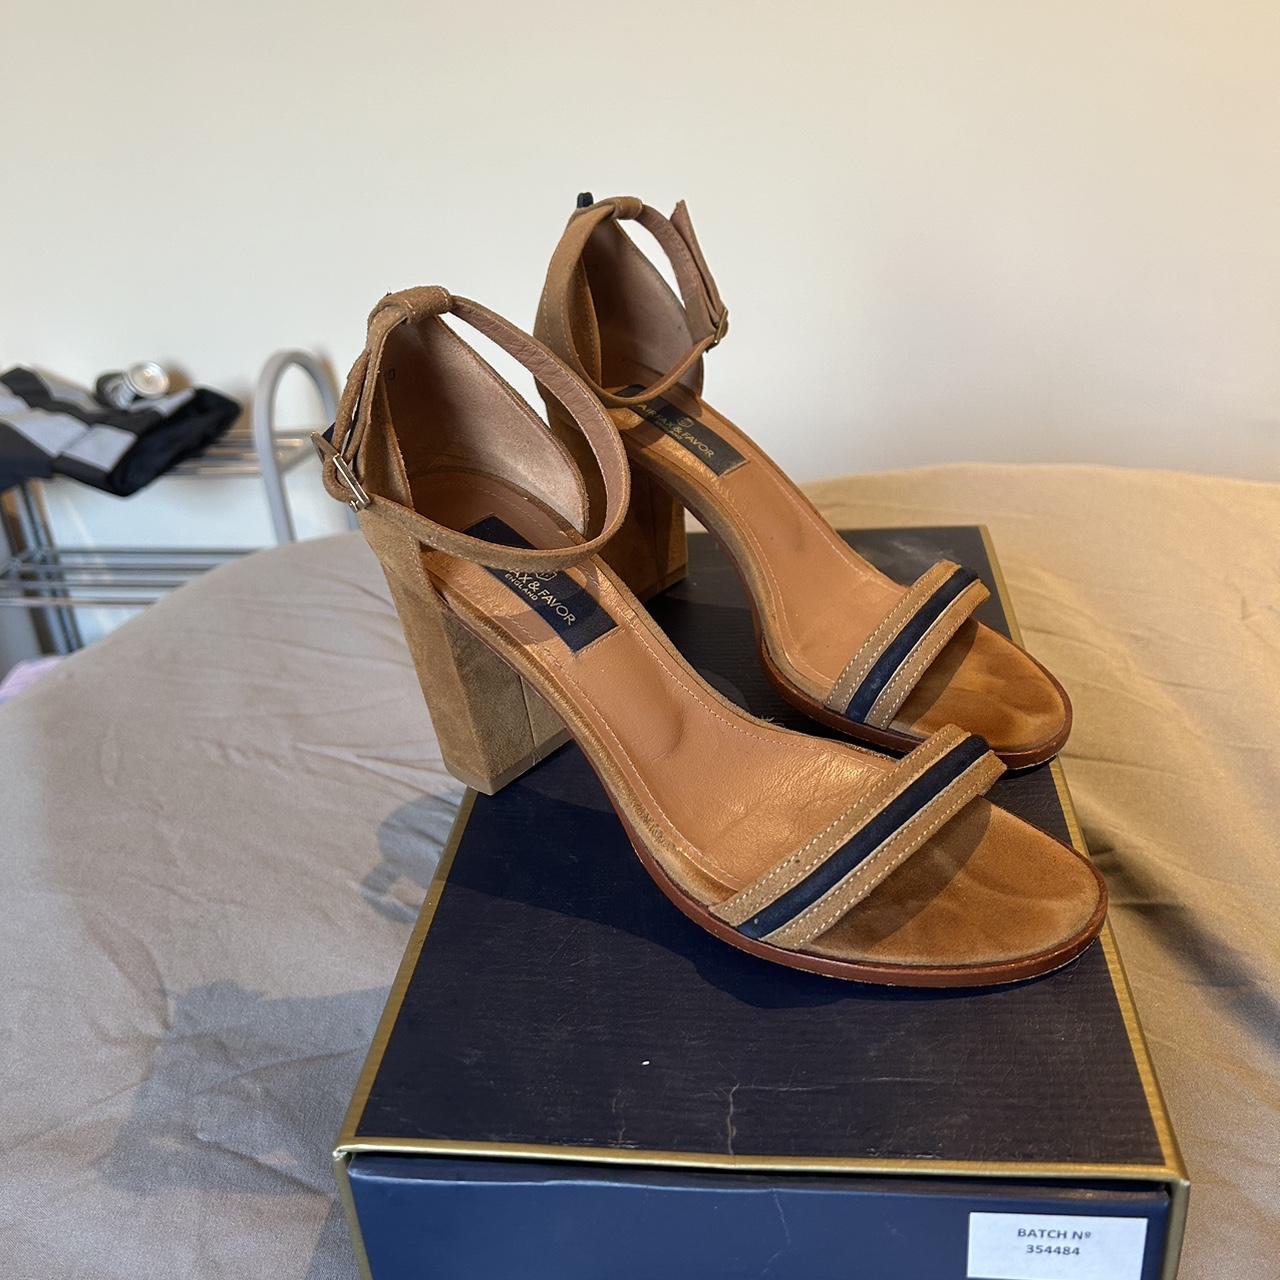 Fairfax and favour daisy heels in tan and navy Only... - Depop